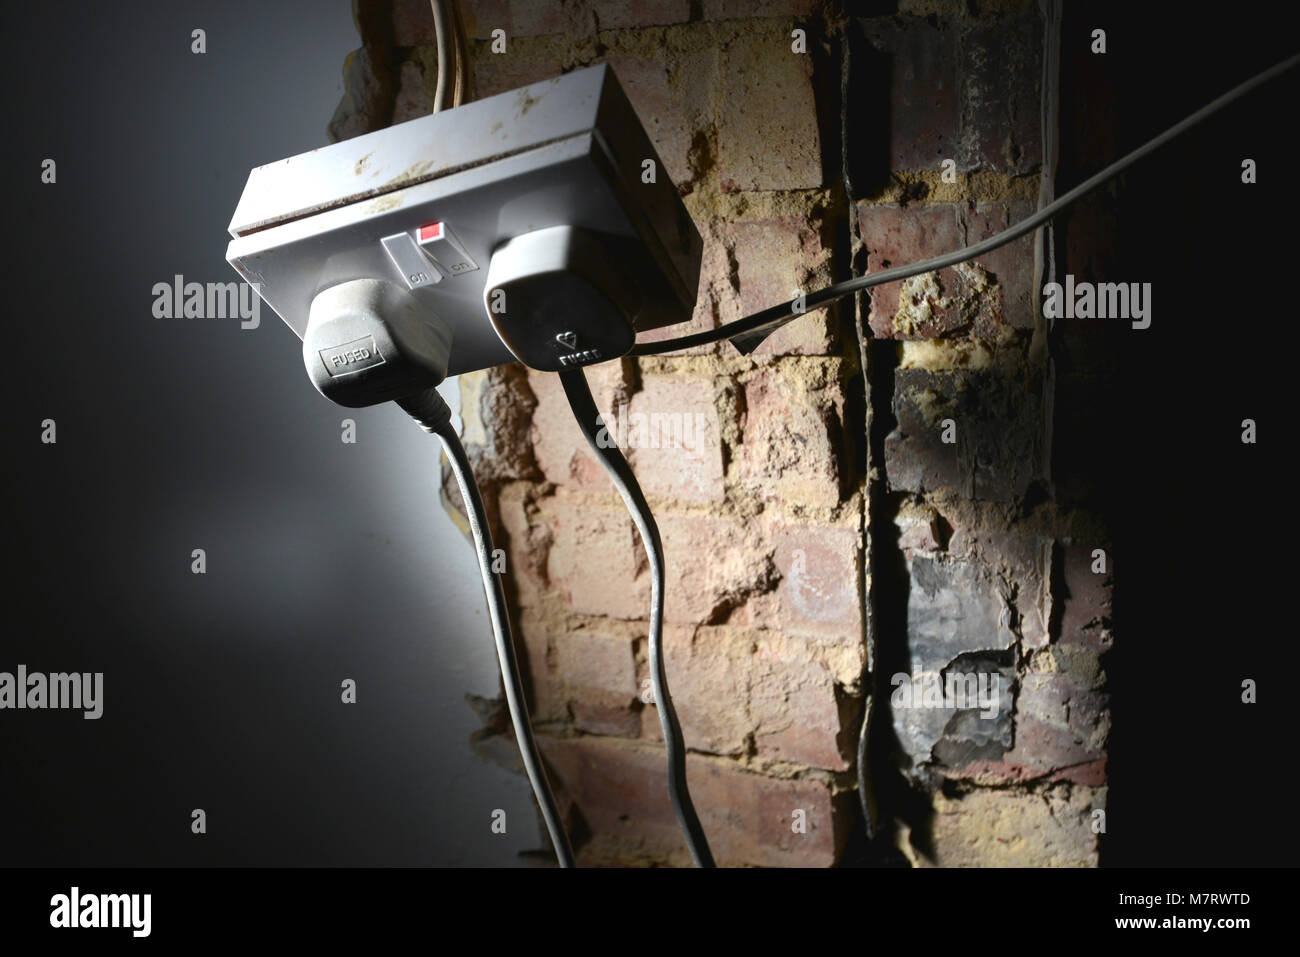 Dangerous wiring on a UK electricity socket, Stock Photo